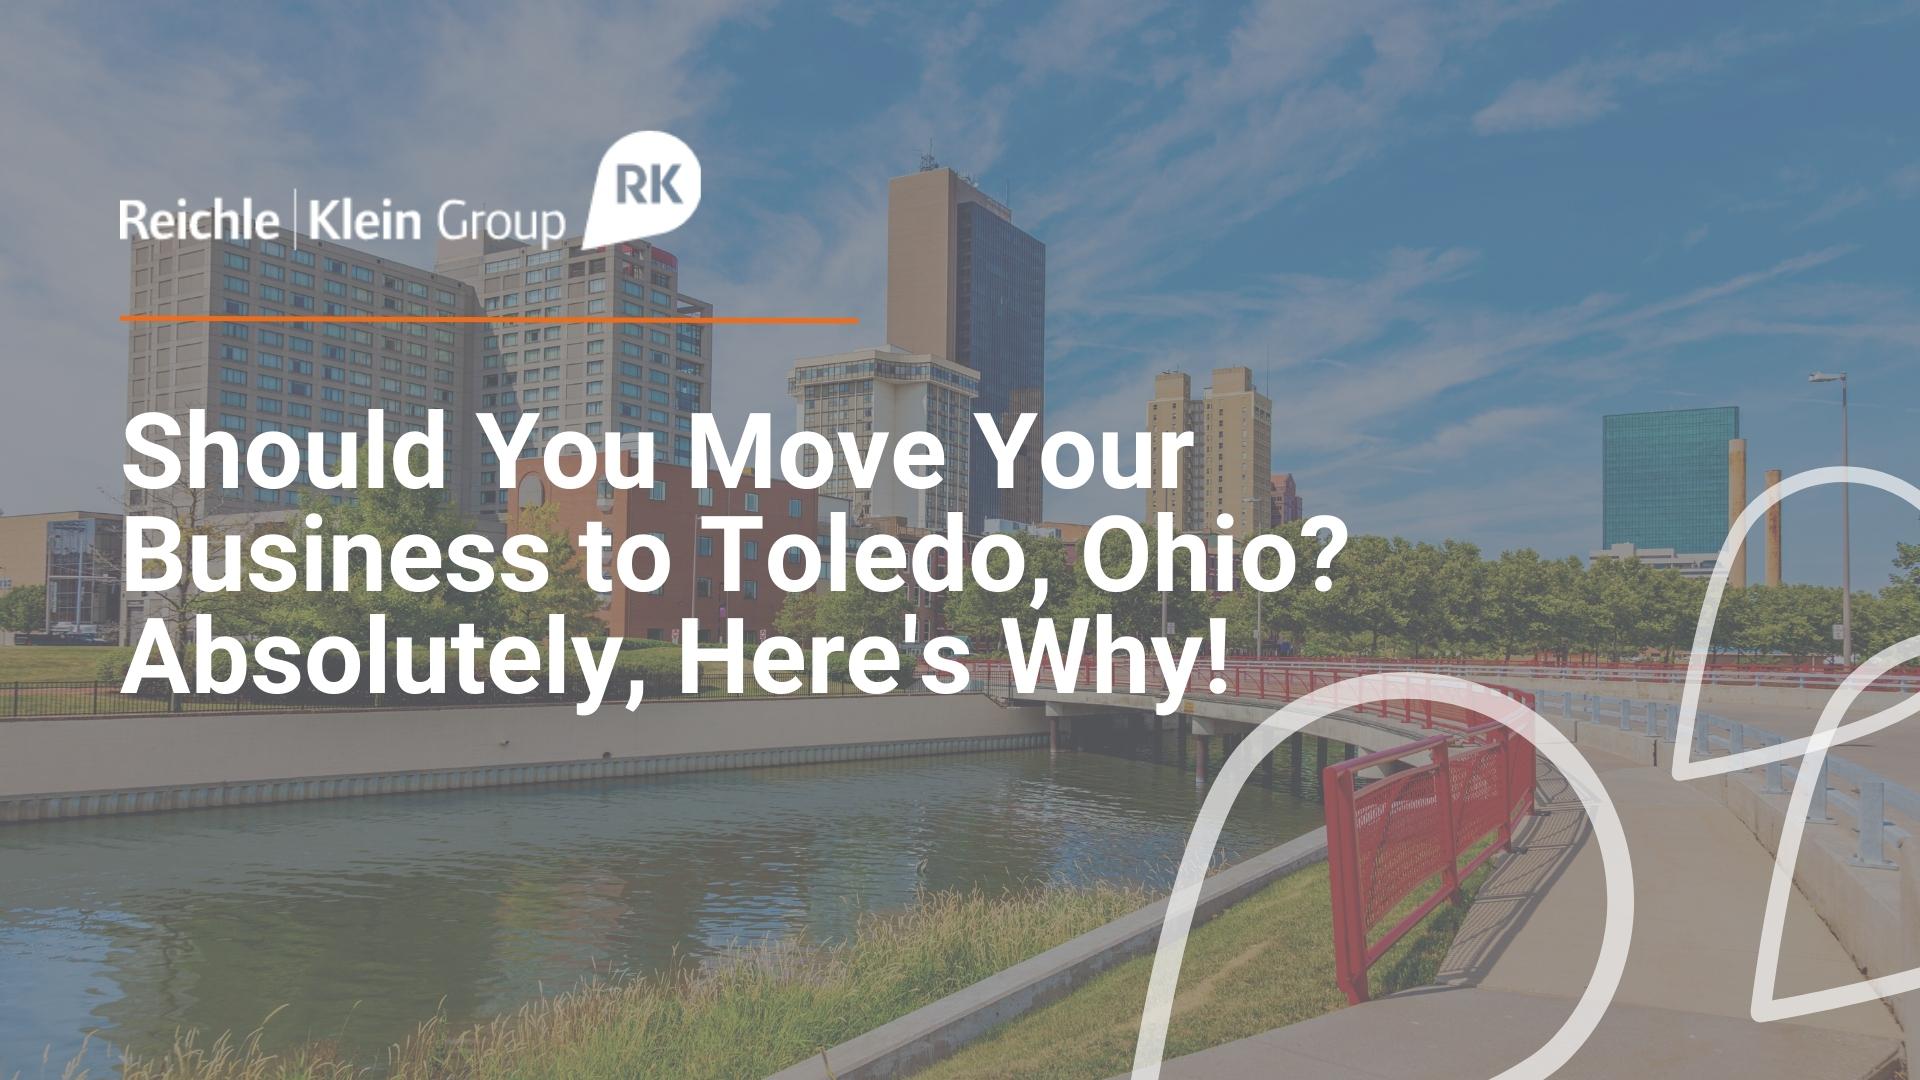 Should You Move Your Business to Toledo, Ohio Absolutely, Here's Why!